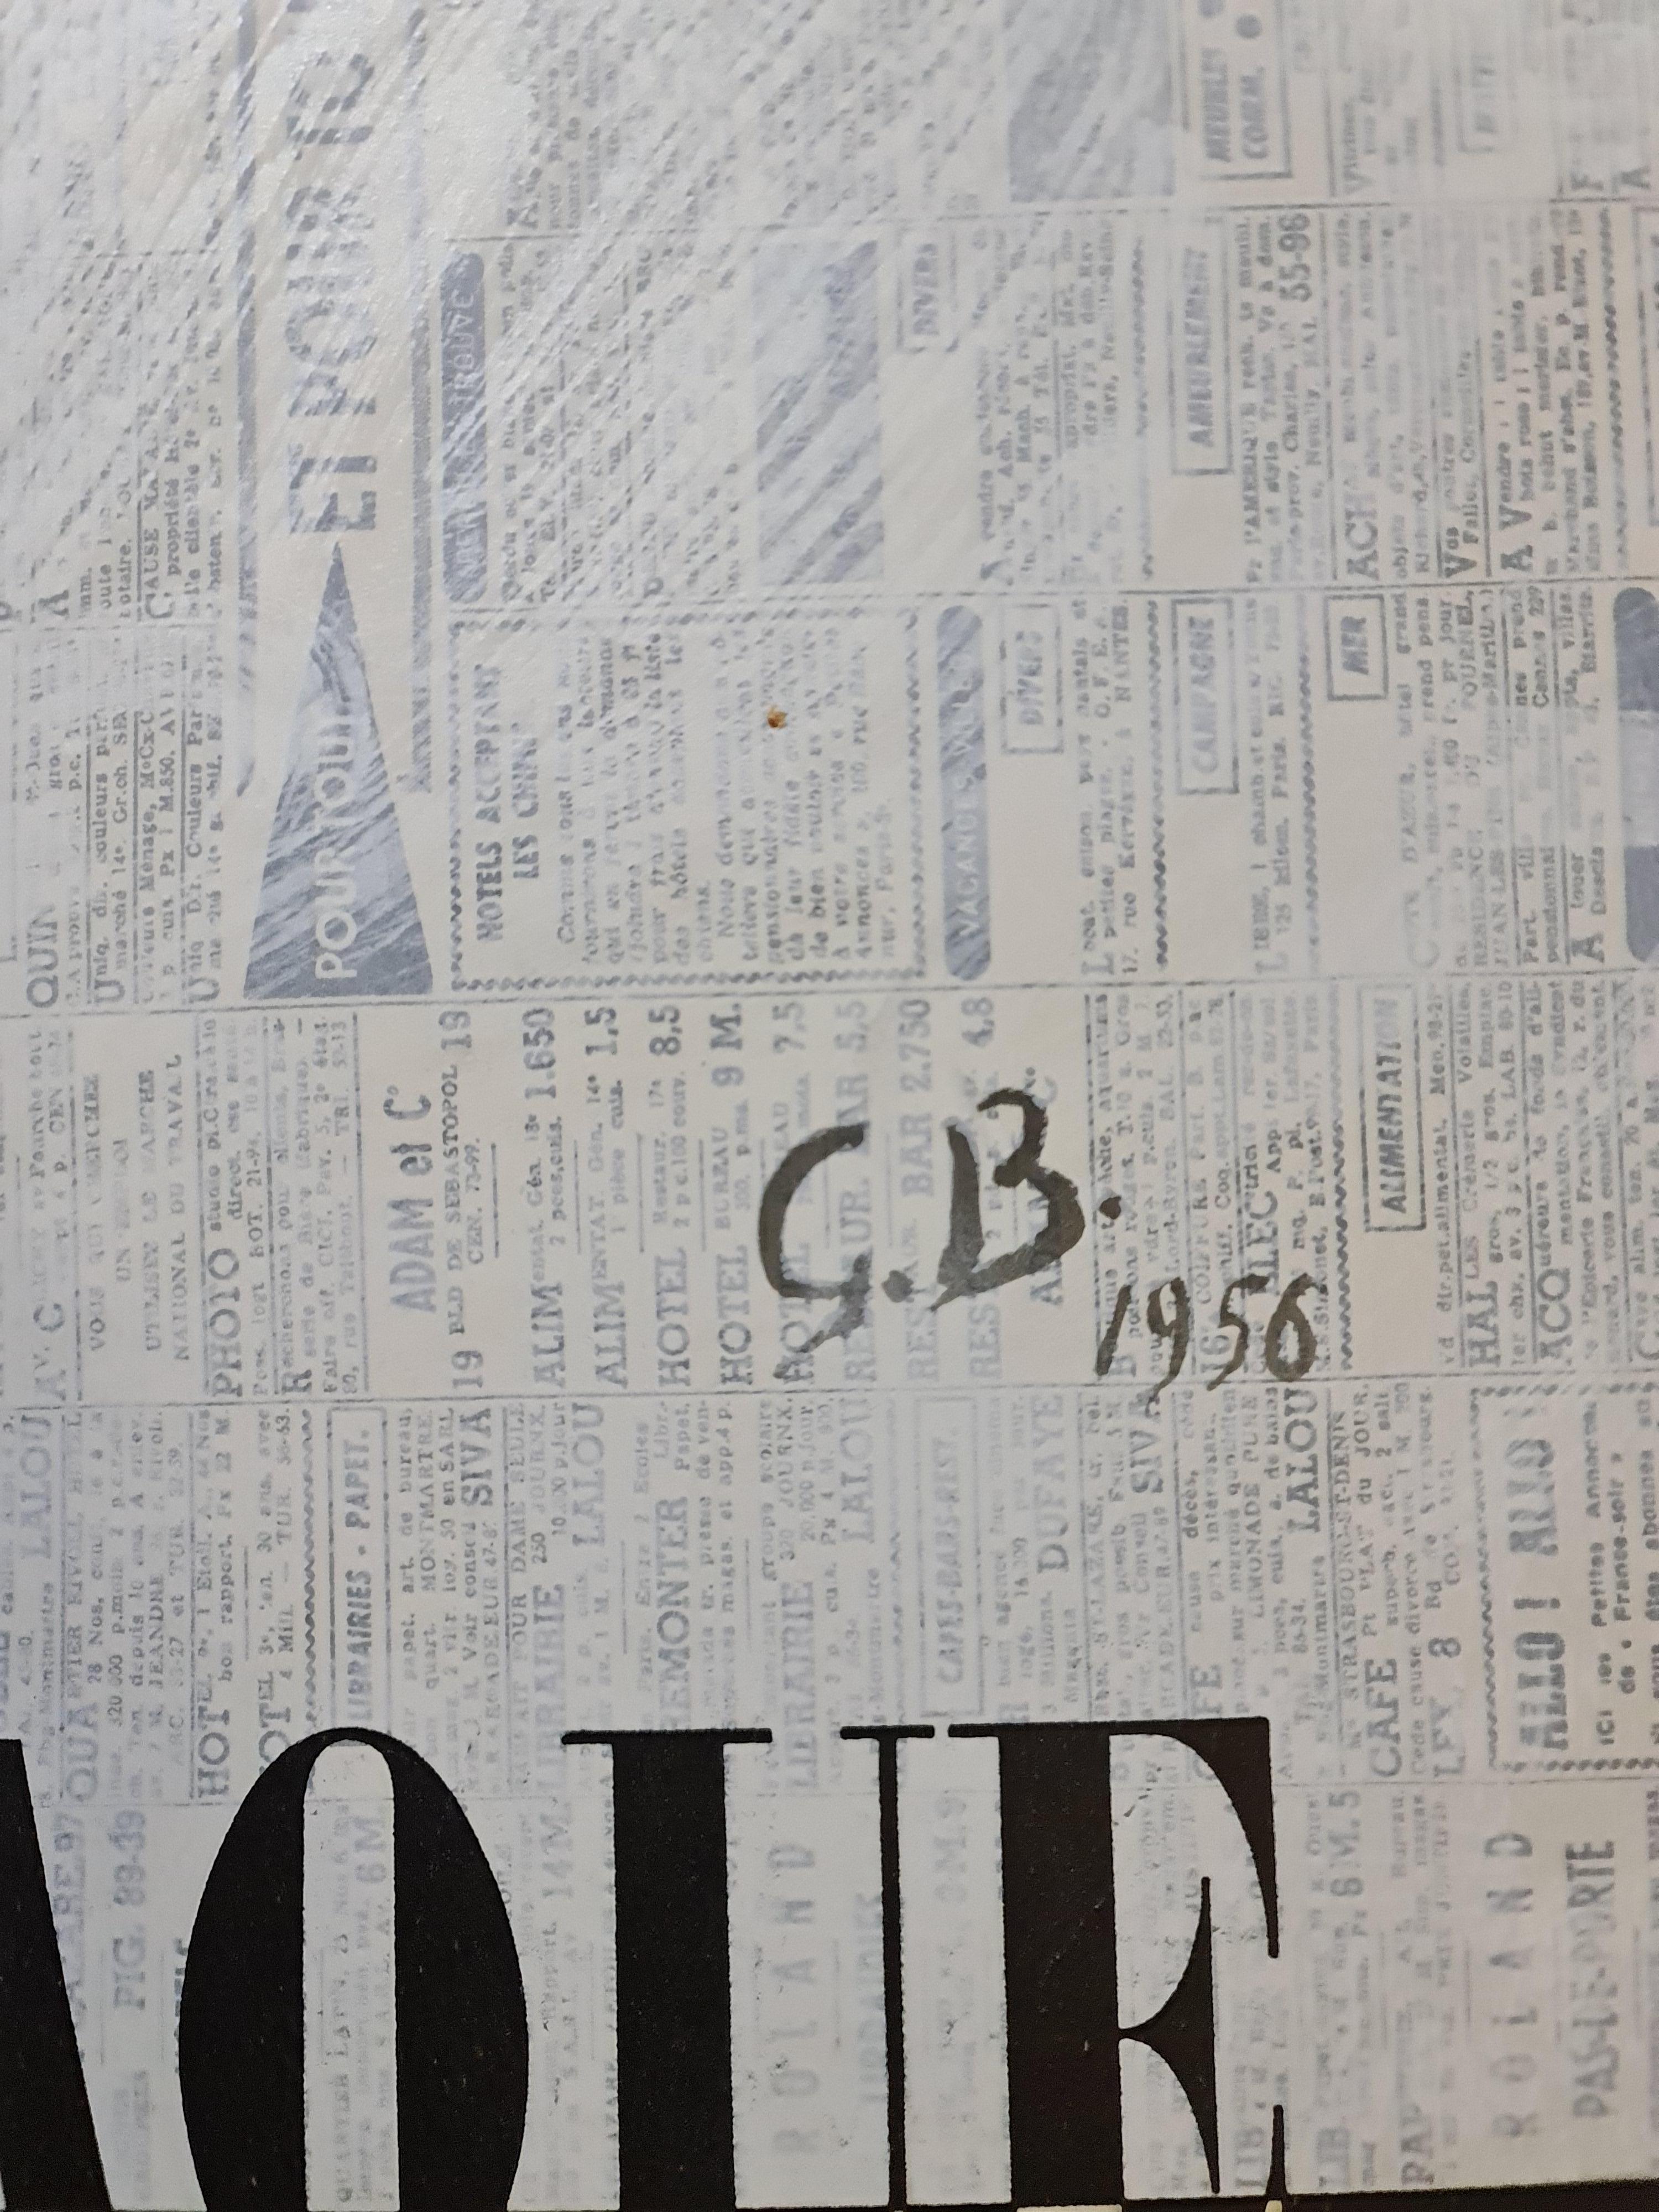 Exhibition of Georges Braque at the Galerie Maeght in 1956 Original Poster 2